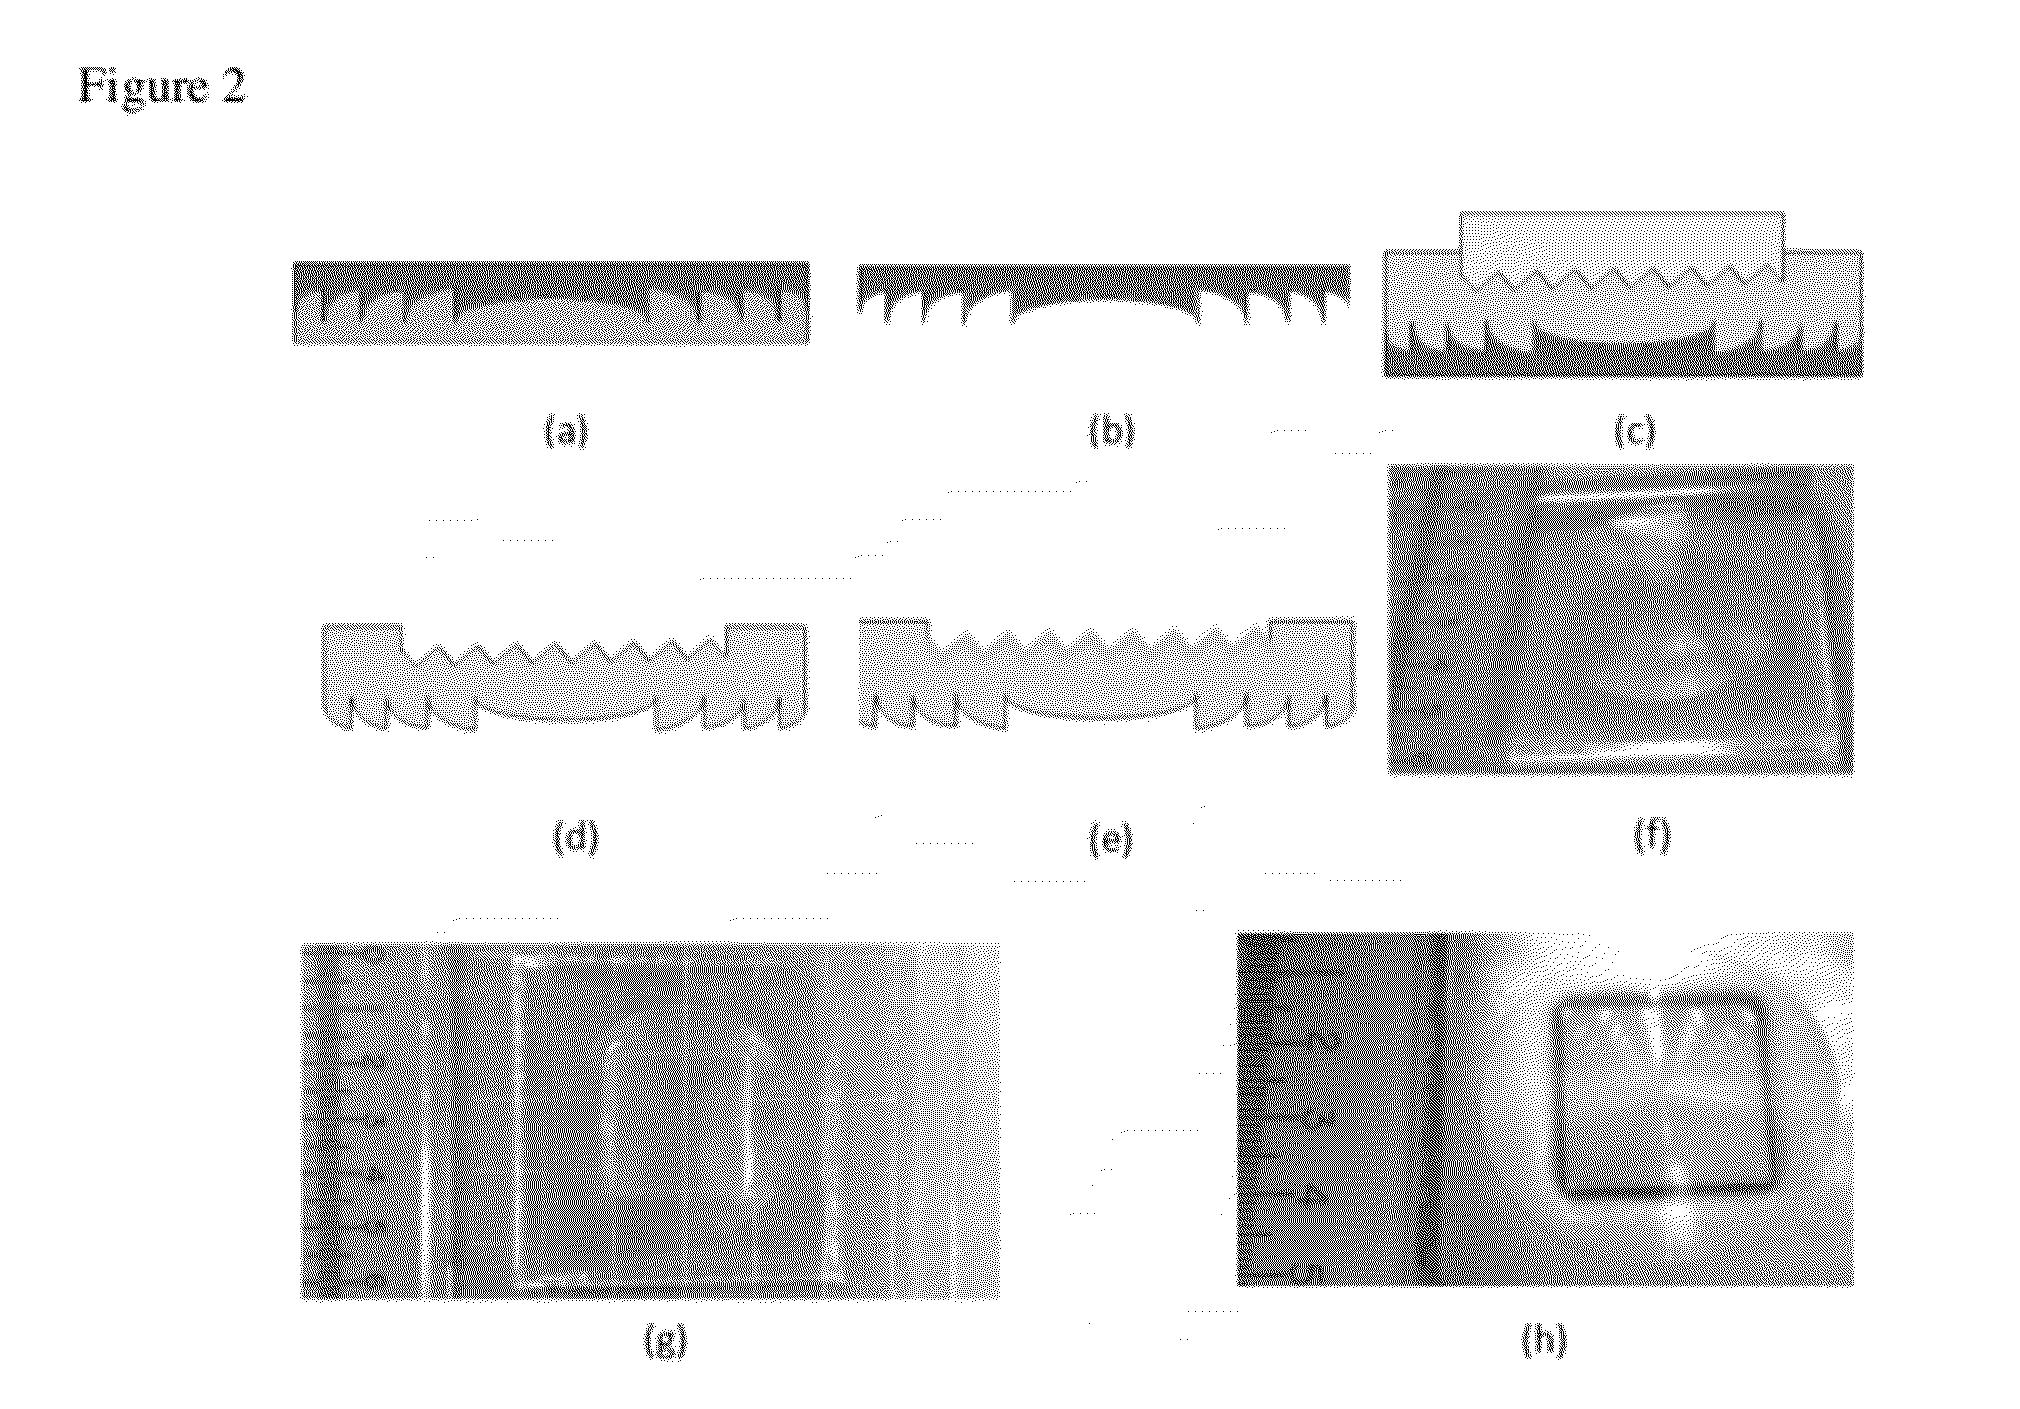 Compact Spectrometer Including a Diffractive Optical Element with Dual Dispersion and Focusing Functionality